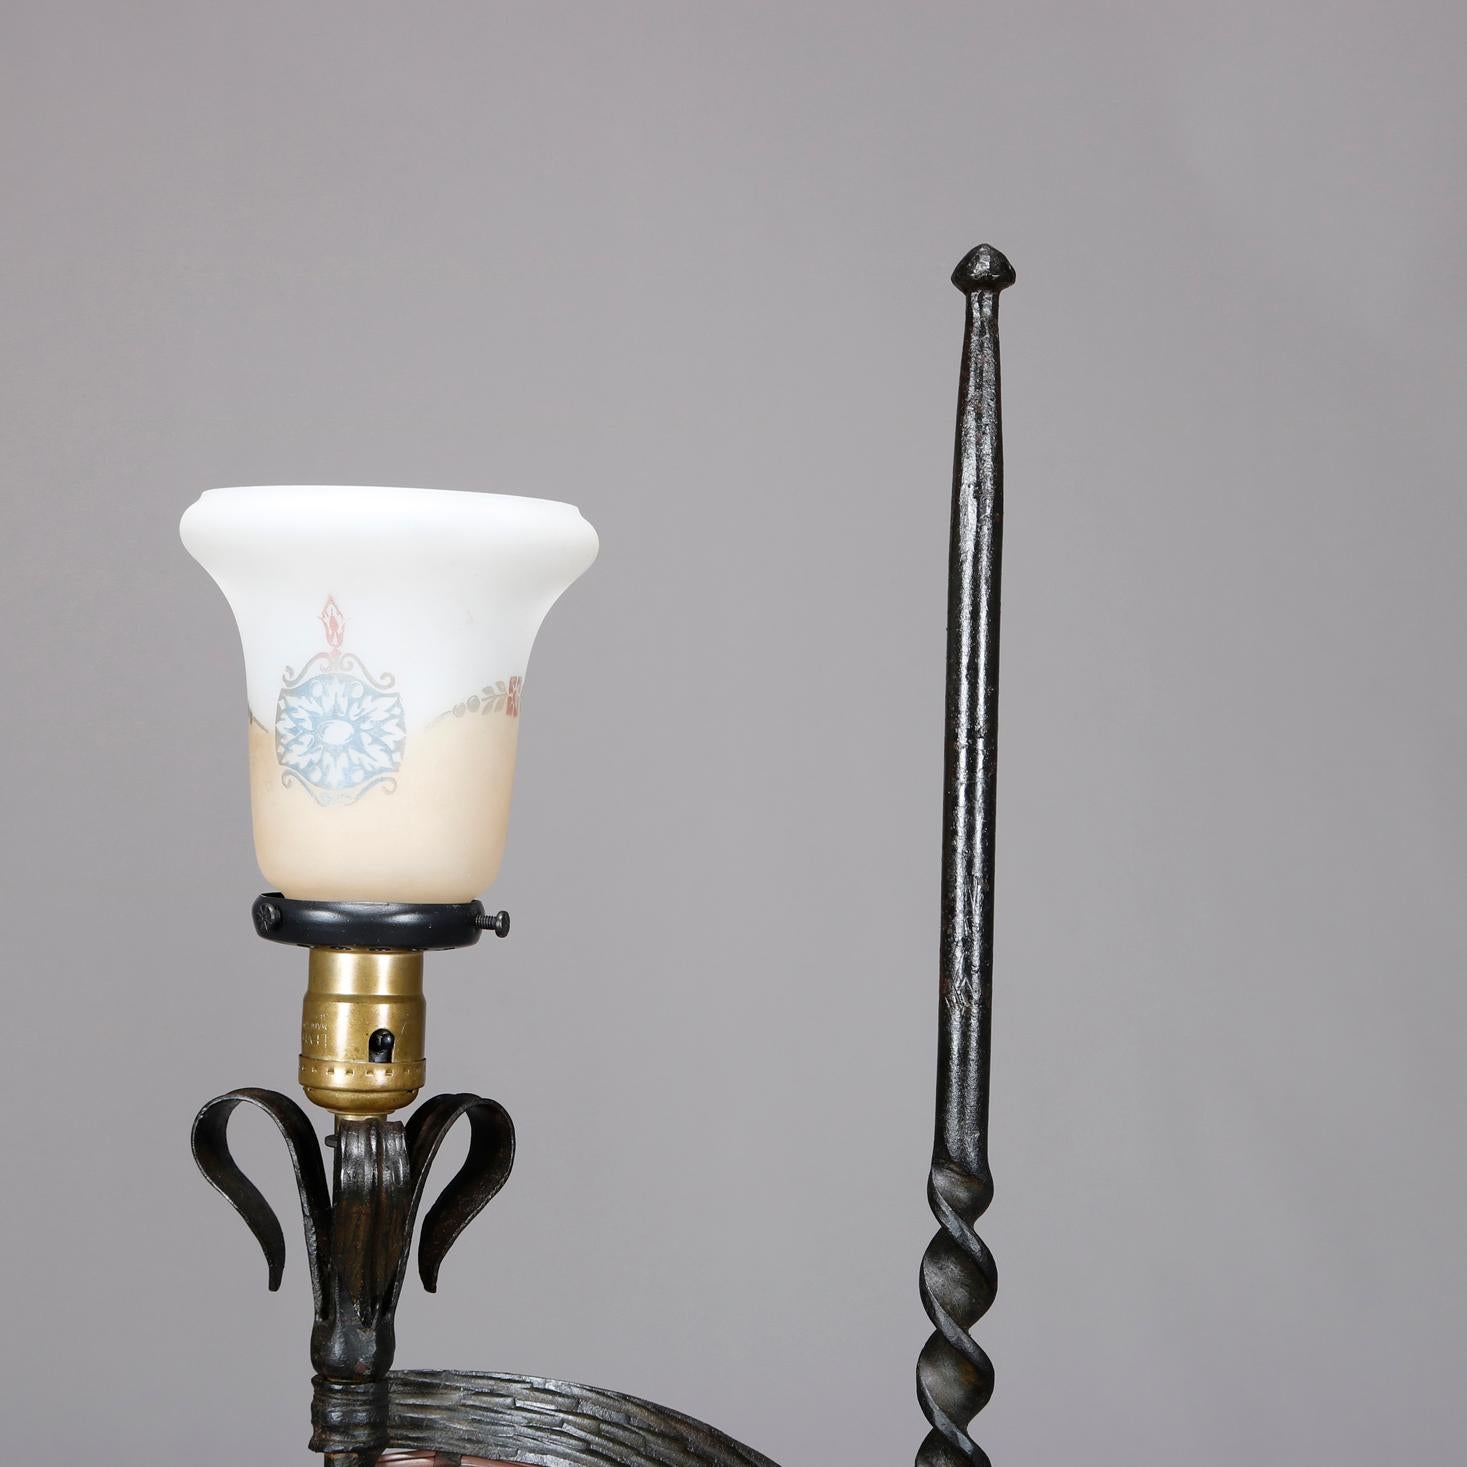 An antique pair of Arts & Crafts floor lamps in the manner of Samuel Yellin offer wrought iron construction with twisted spire form shaft having scrolled arms terminating in up and down lights, raised on tripod stylized legs, circa